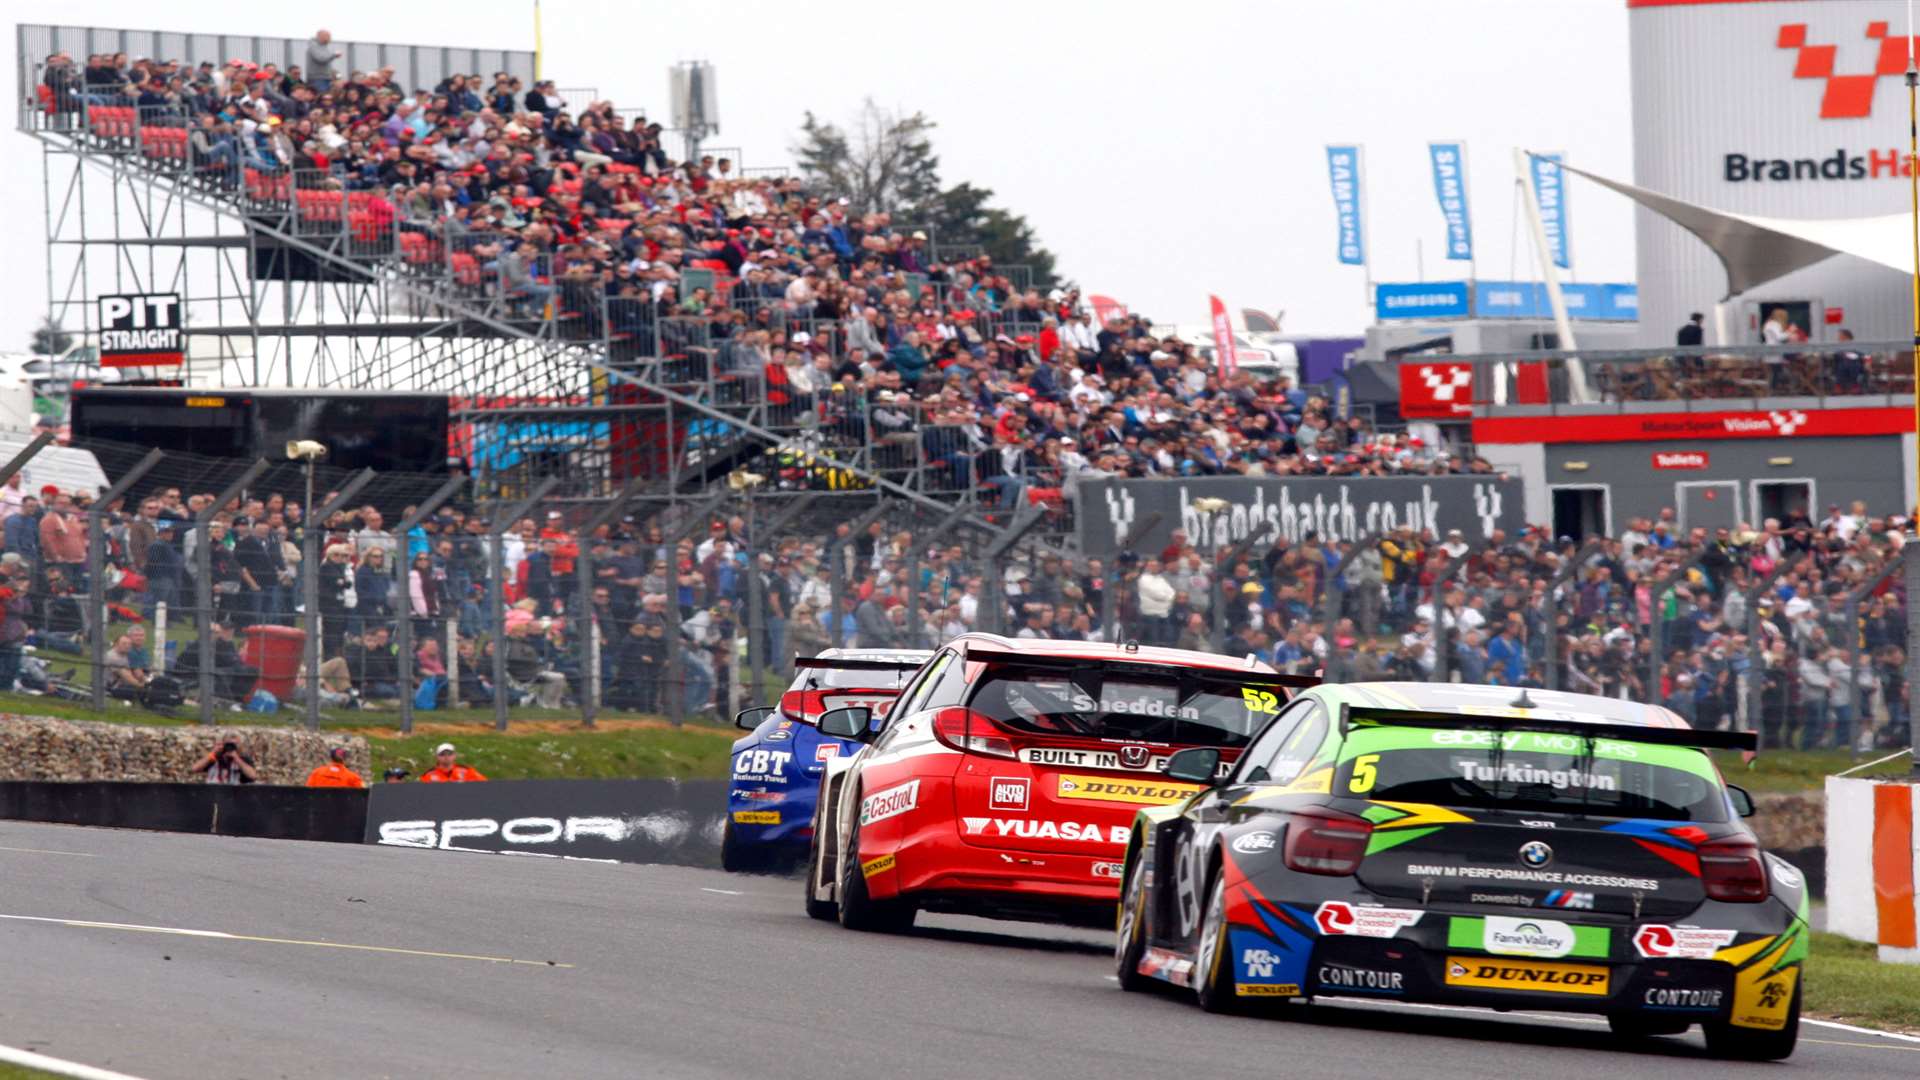 A big crowd is expected at Brands Hatch this weekend